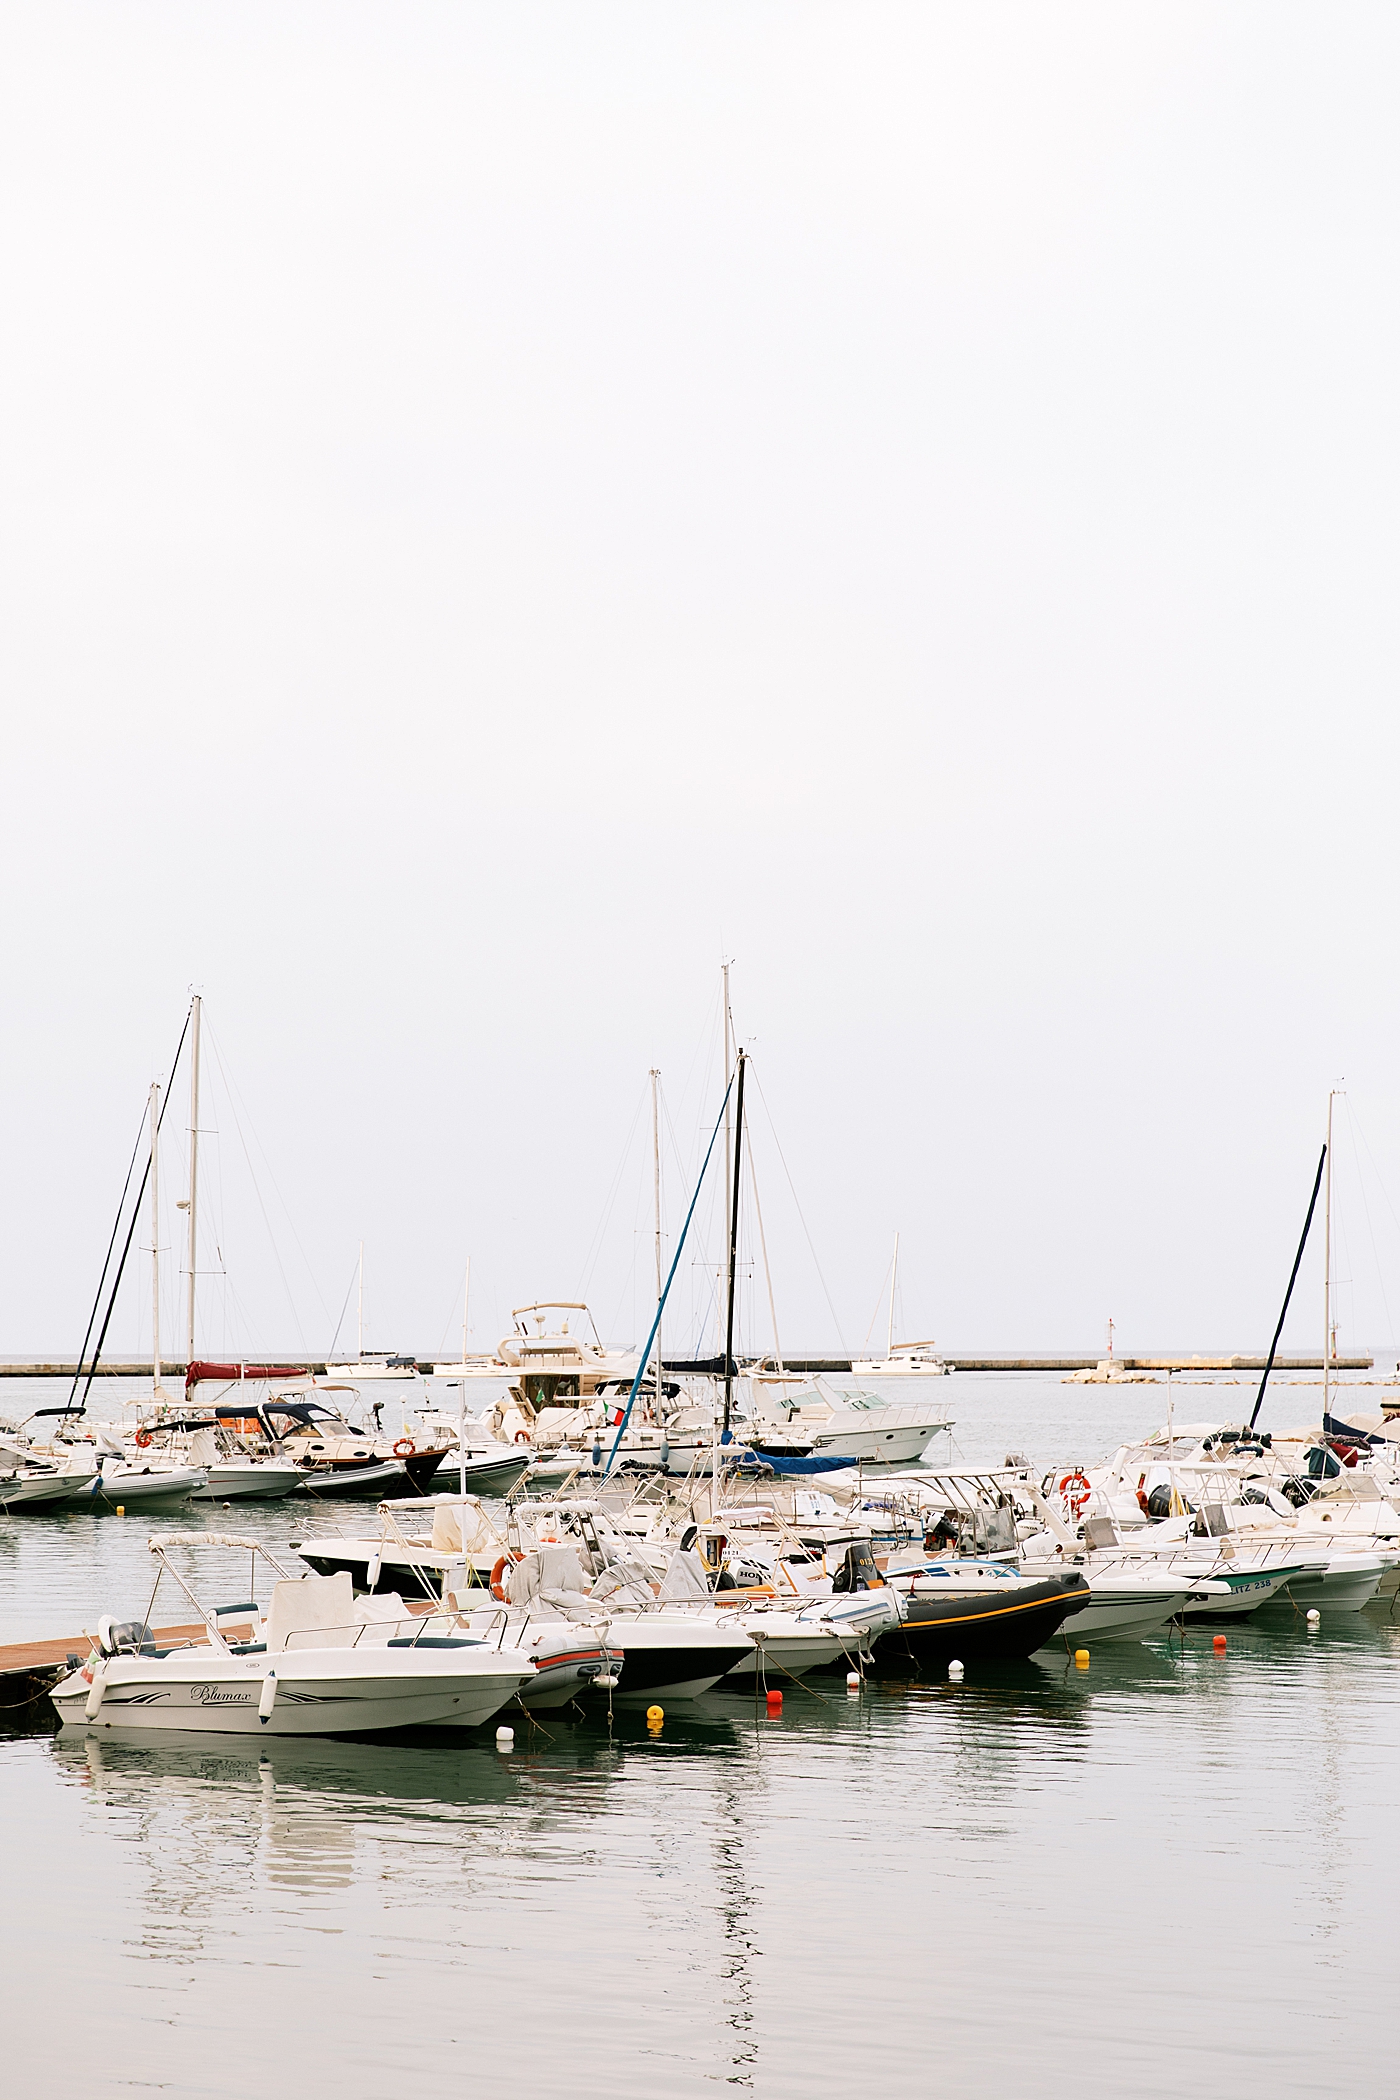 Boats in the harbor in Sicily | Photo by Josie Derrick 